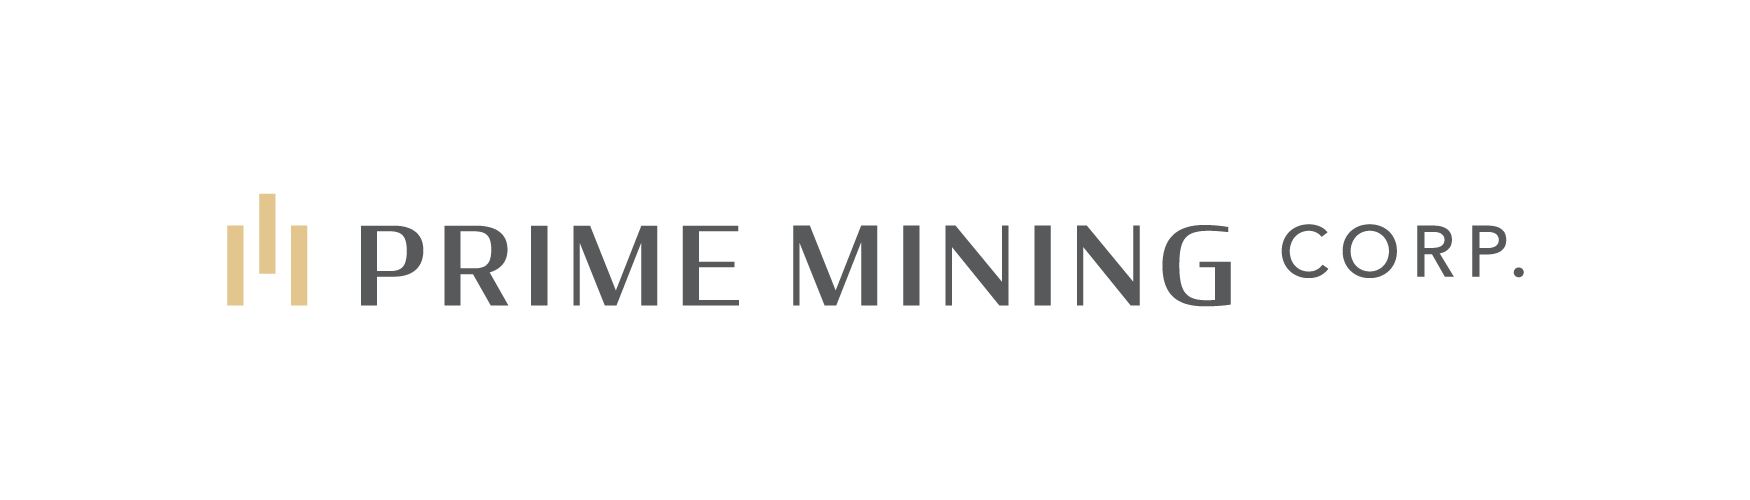 Prime Mining Announces Trading on the OTCQX Market